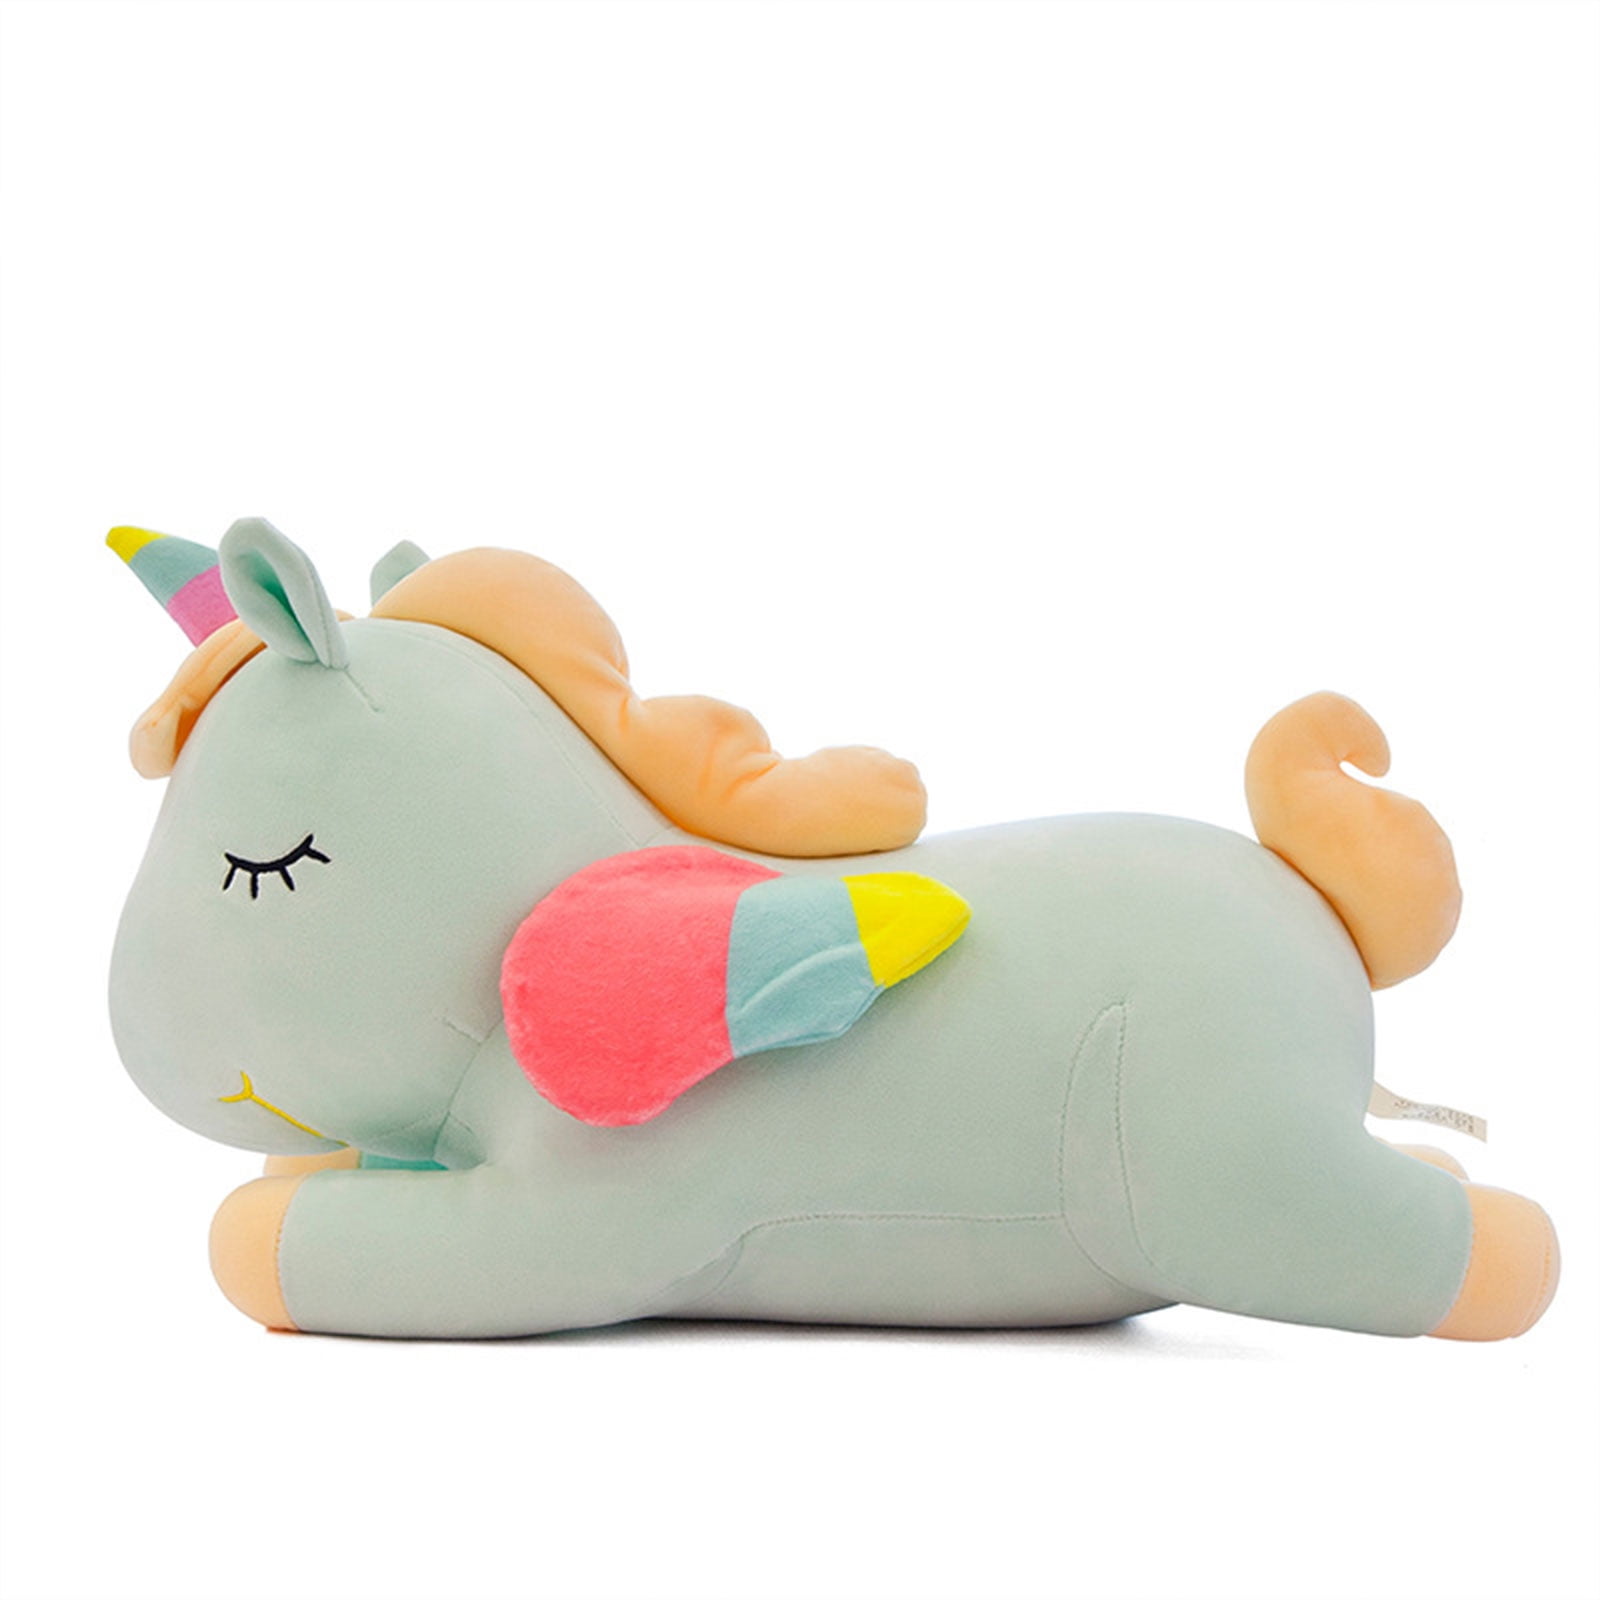 Luxe Fuzzy Soft Fur White Unicorn 19 Inch Stuffed Animal Plush PAL for sale online 